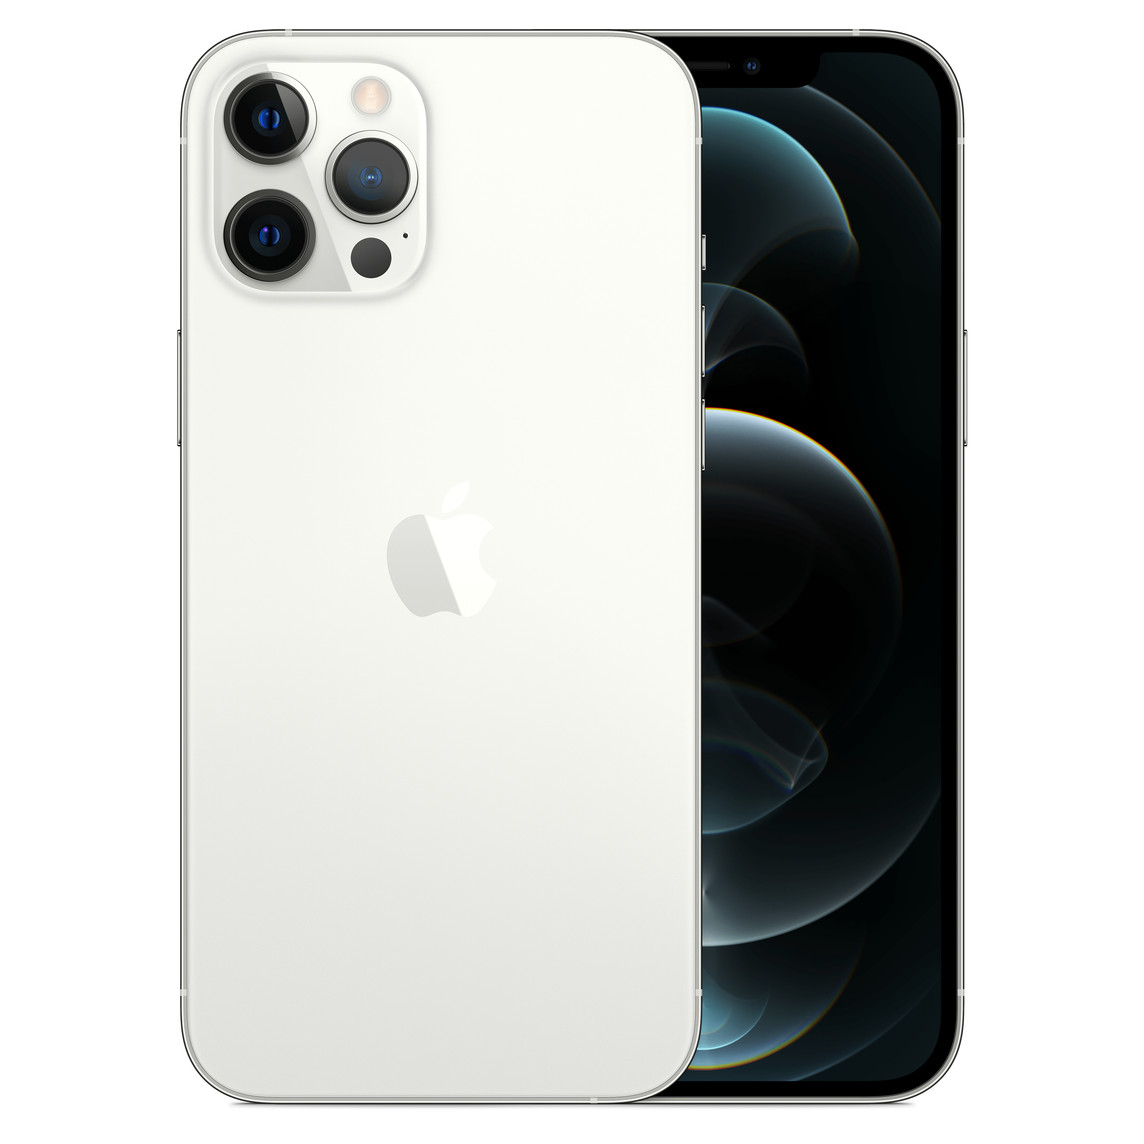 Silver iPhone 12 Pro Max, Pro camera system with True Tone flash, lidar, microphone, centered Apple logo. Front, all-screen display